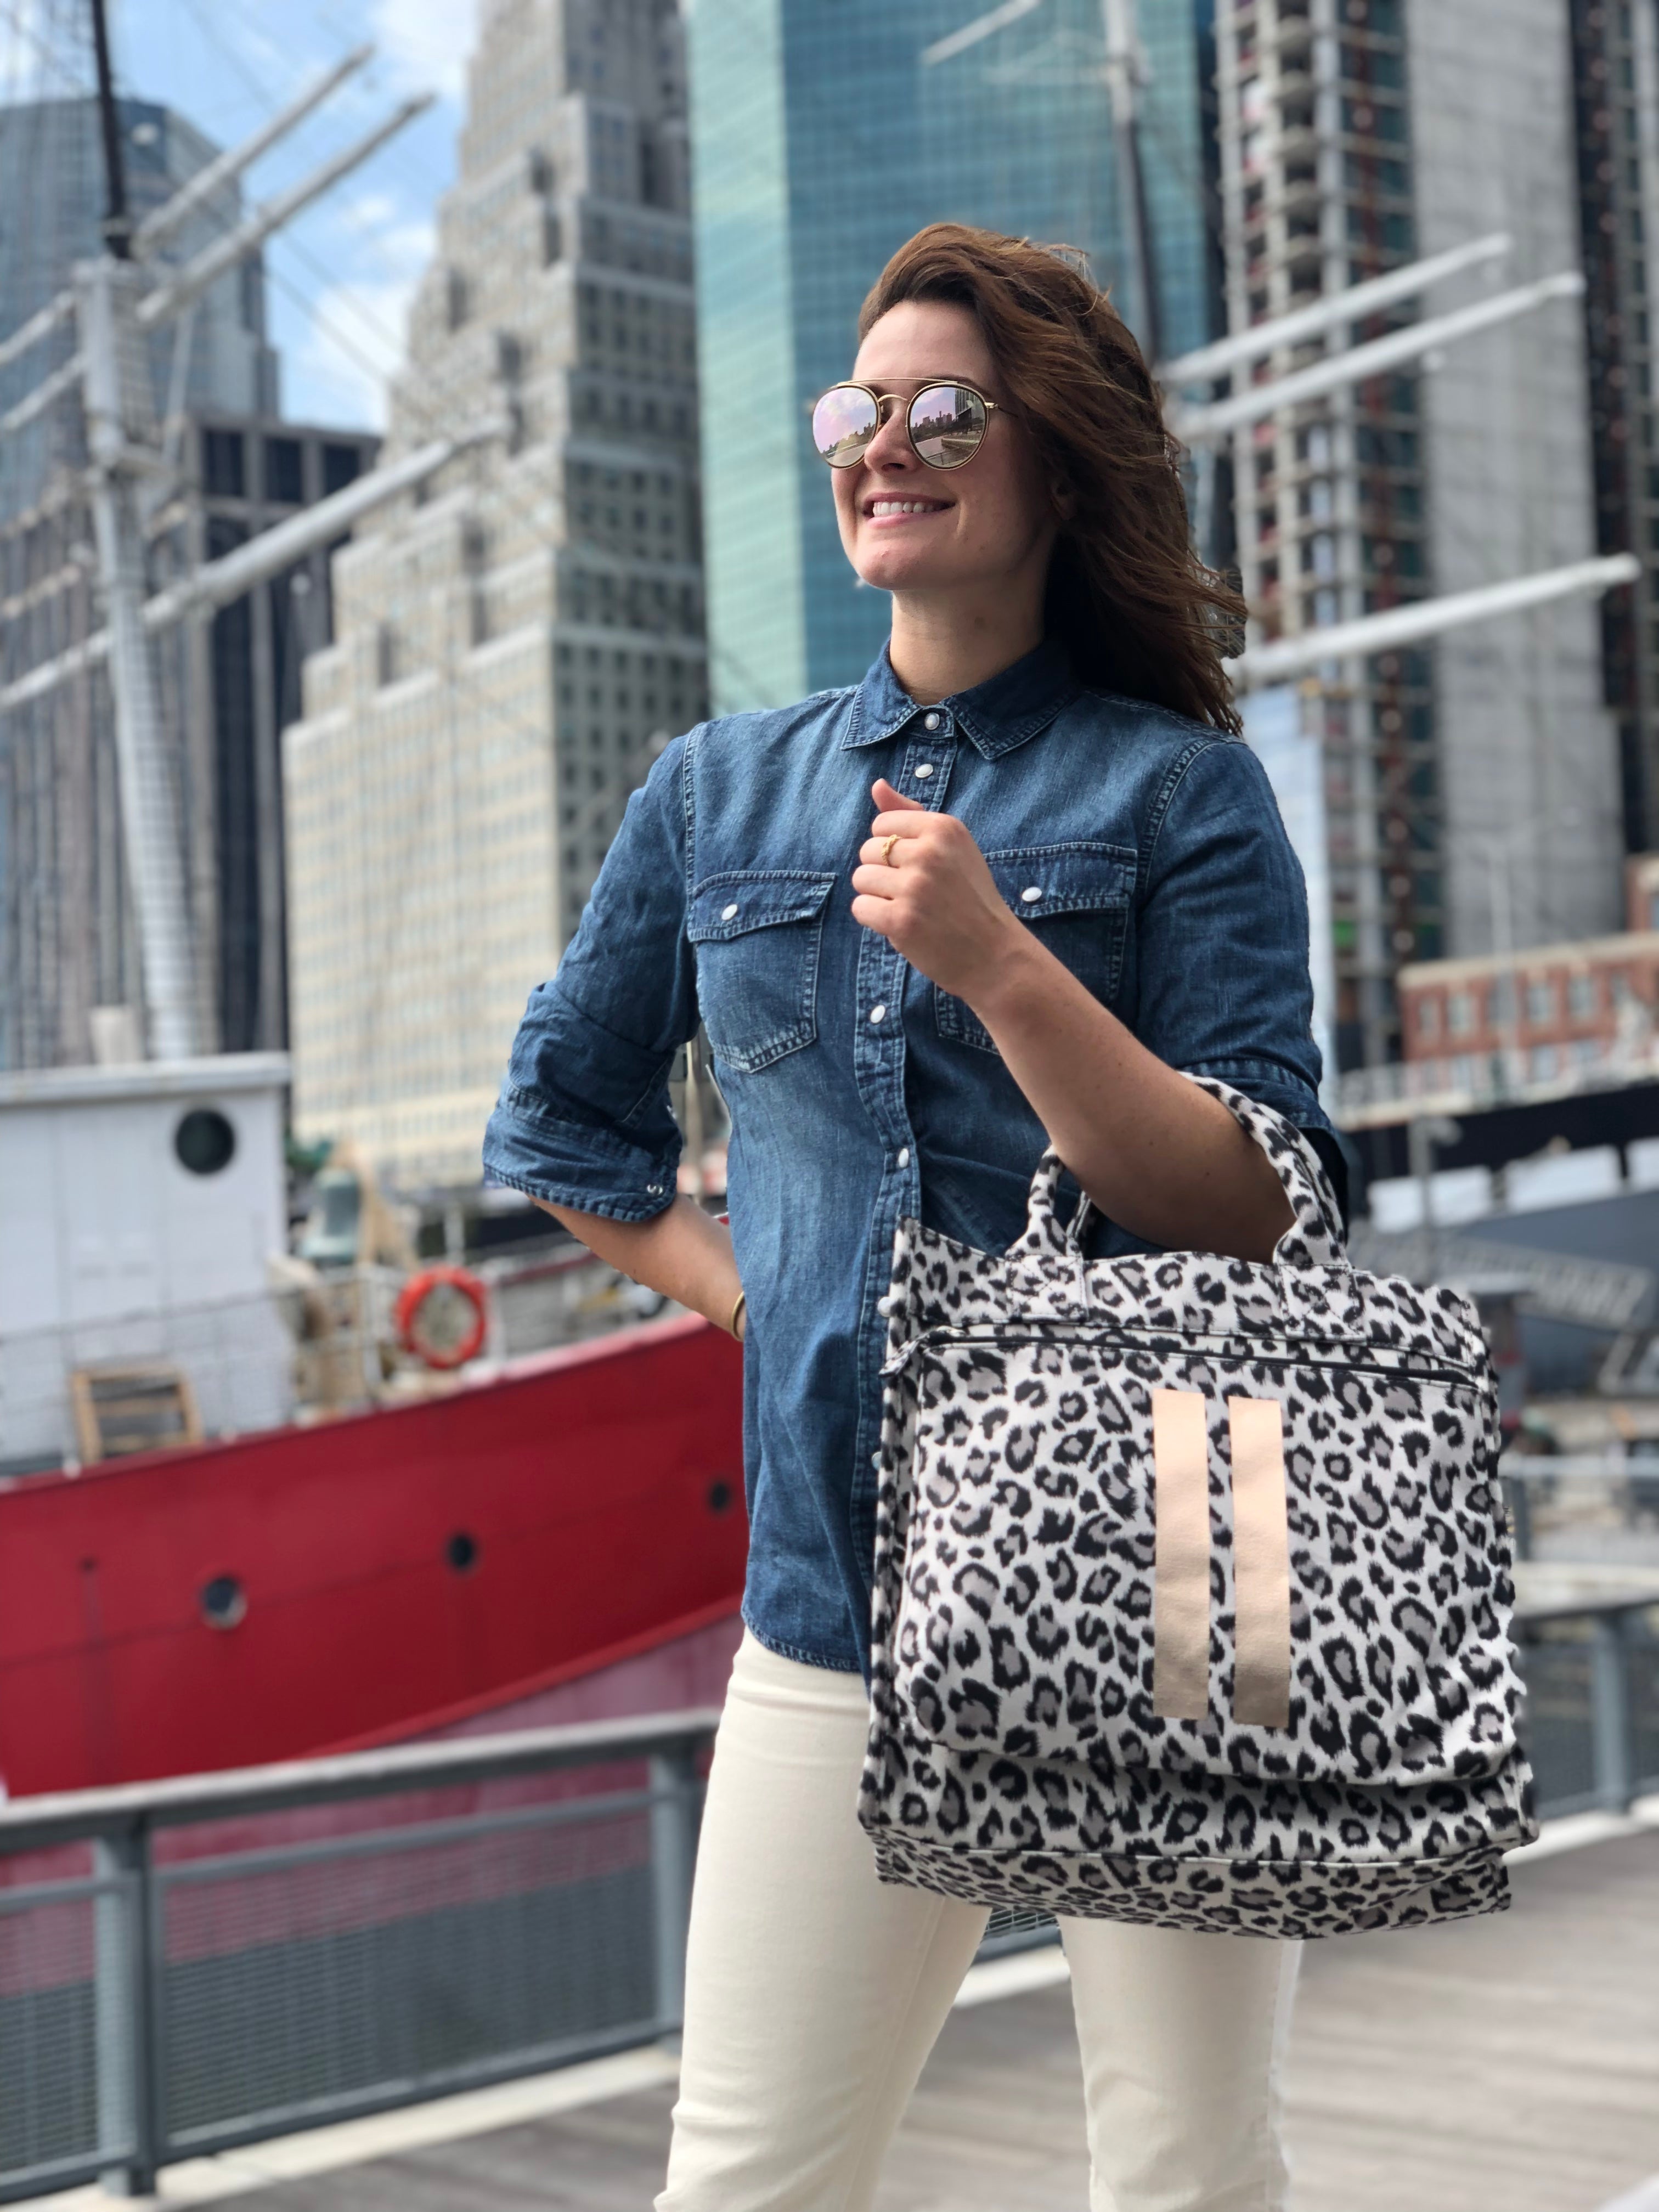 Future Bag - Leopard  Enjoy over $100 OFF this week! - Quilted Koala